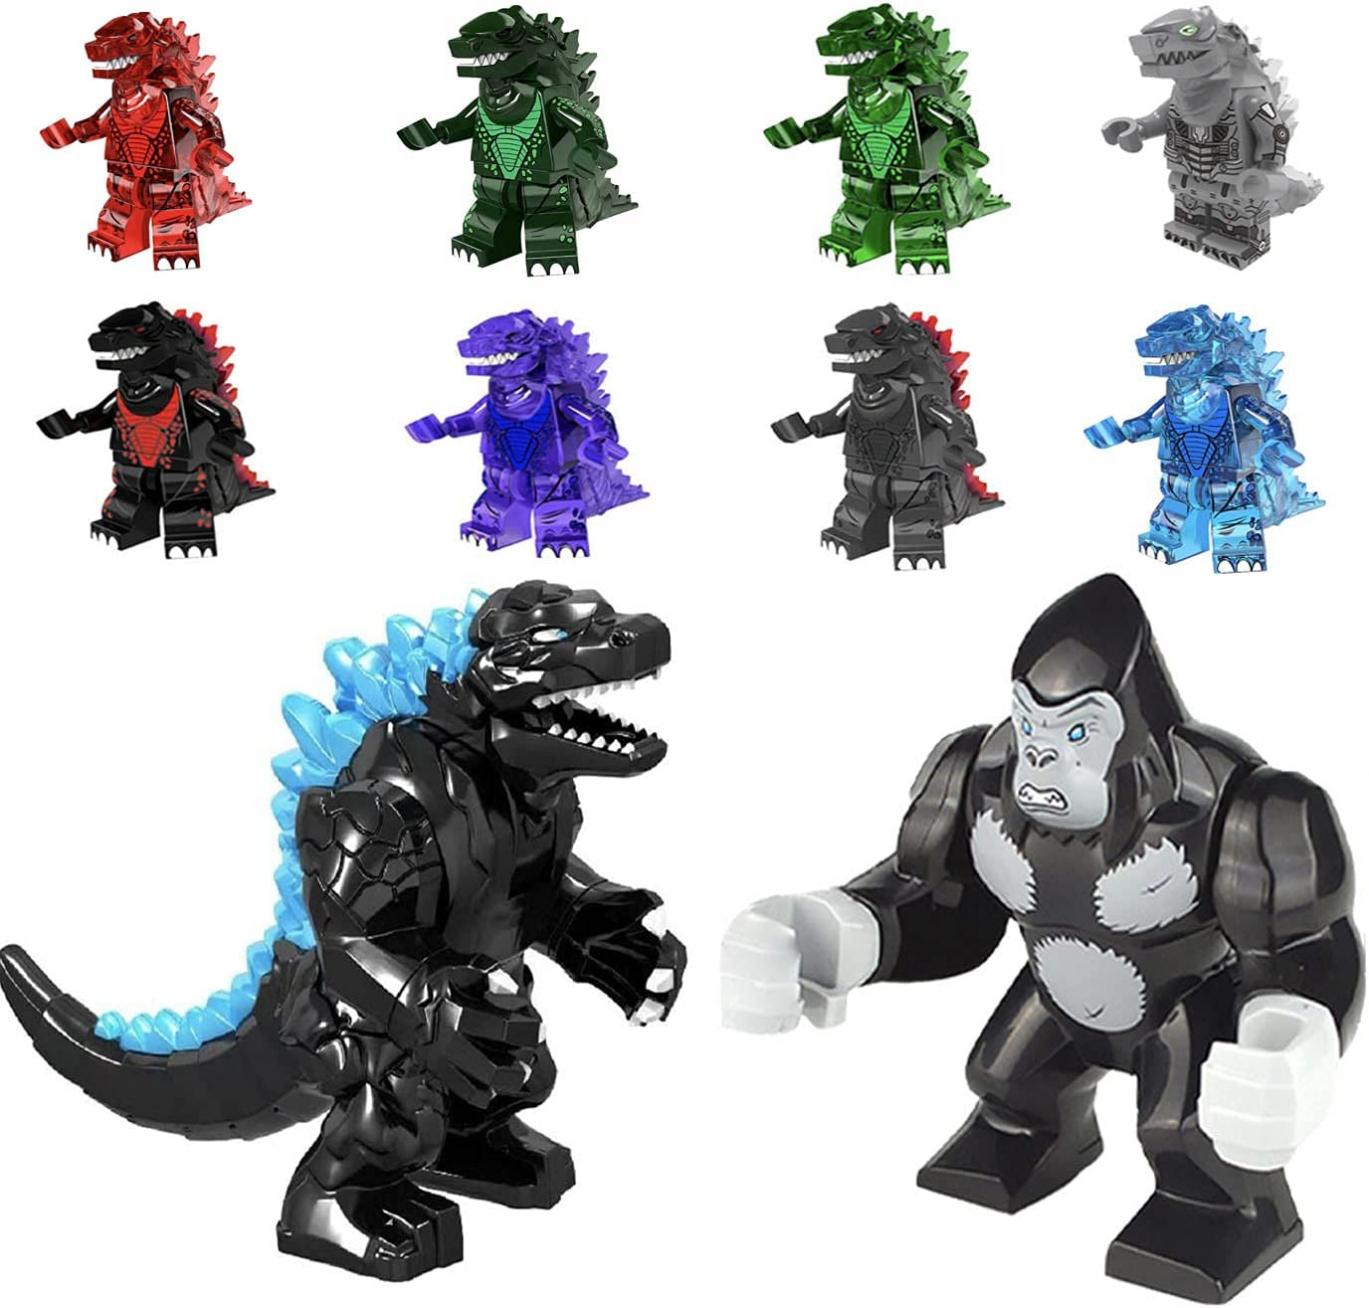 Set of 10 Godzilla Vs King Kong Action Figures, Godzilla Vs Kong Toys 2021, Godzilla Vs Kong Movie, Movable Joint Action Figures, Assembled Toys for Kids Lucasarto (Godzilla Package)